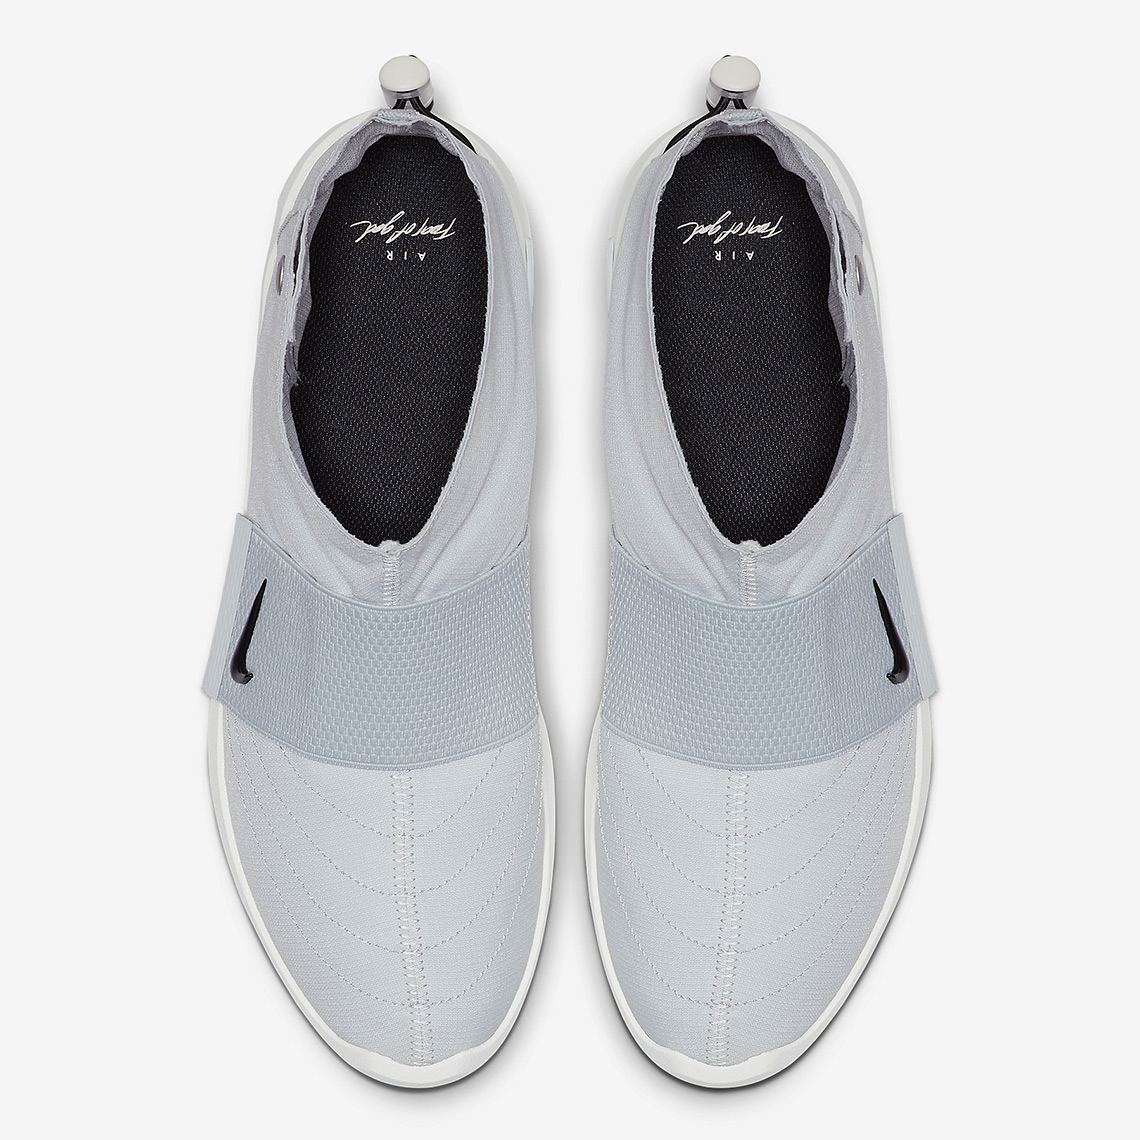 nike air fear of god moccasin at8086 001 5